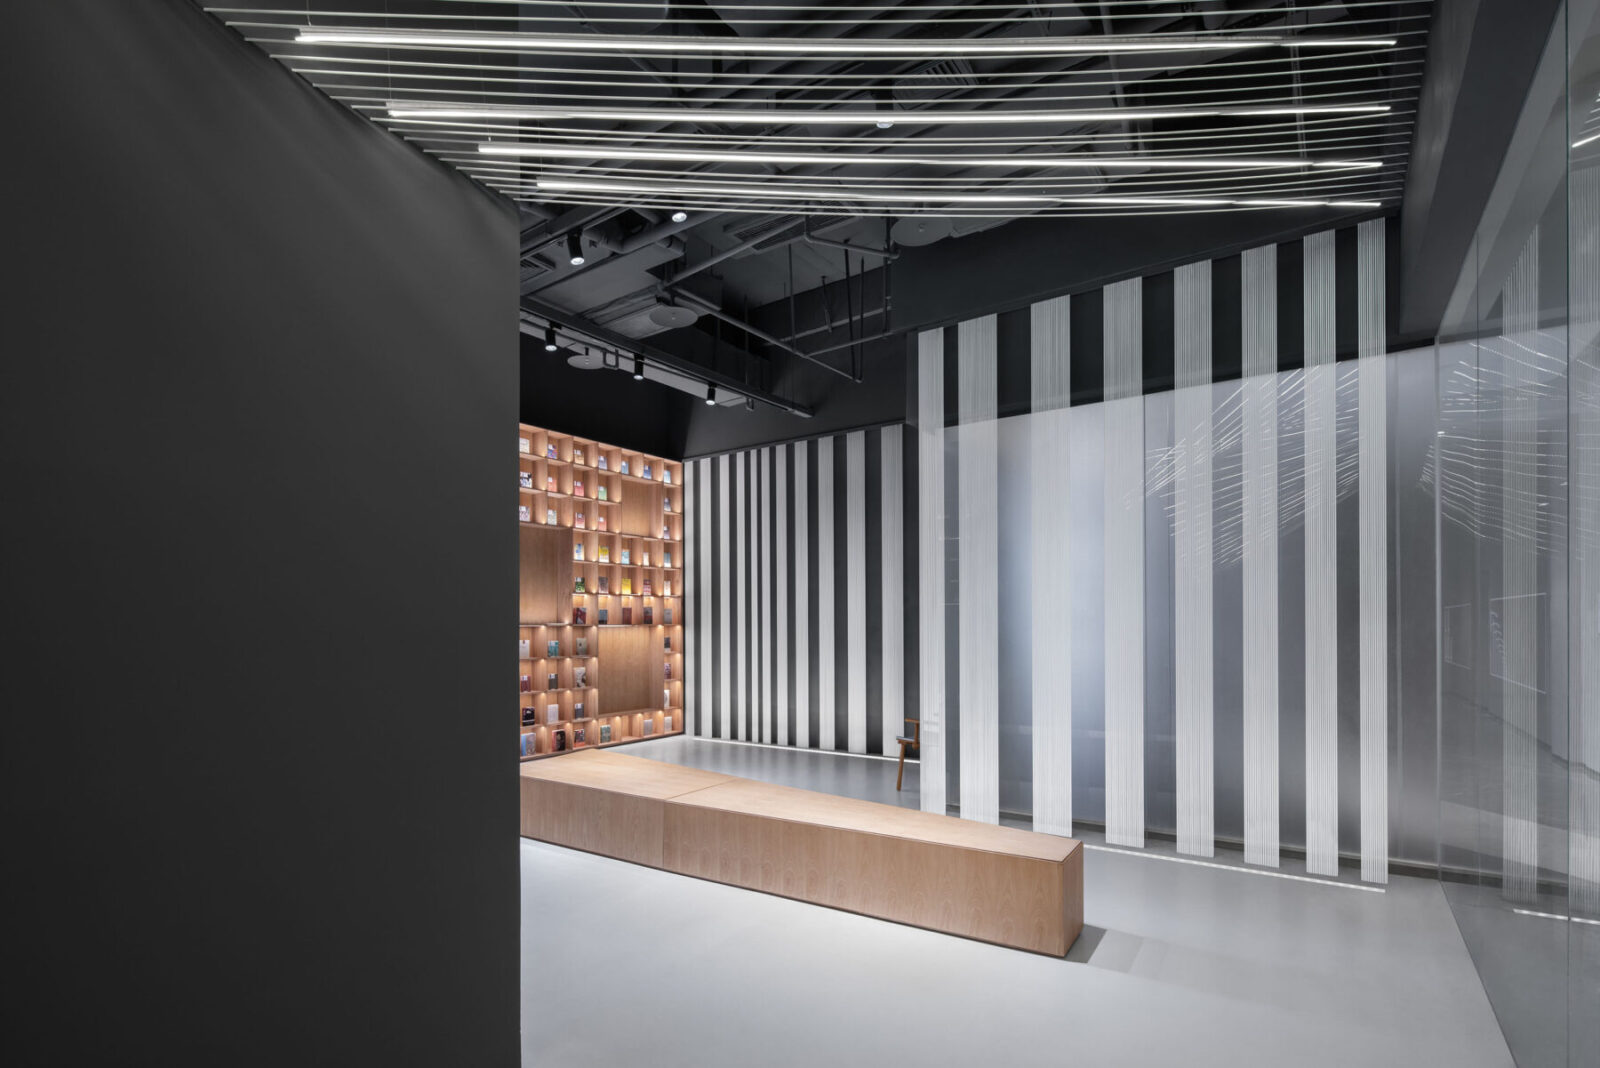 Archisearch The Glade Bookstore in Chongqing, China | HAS design and research